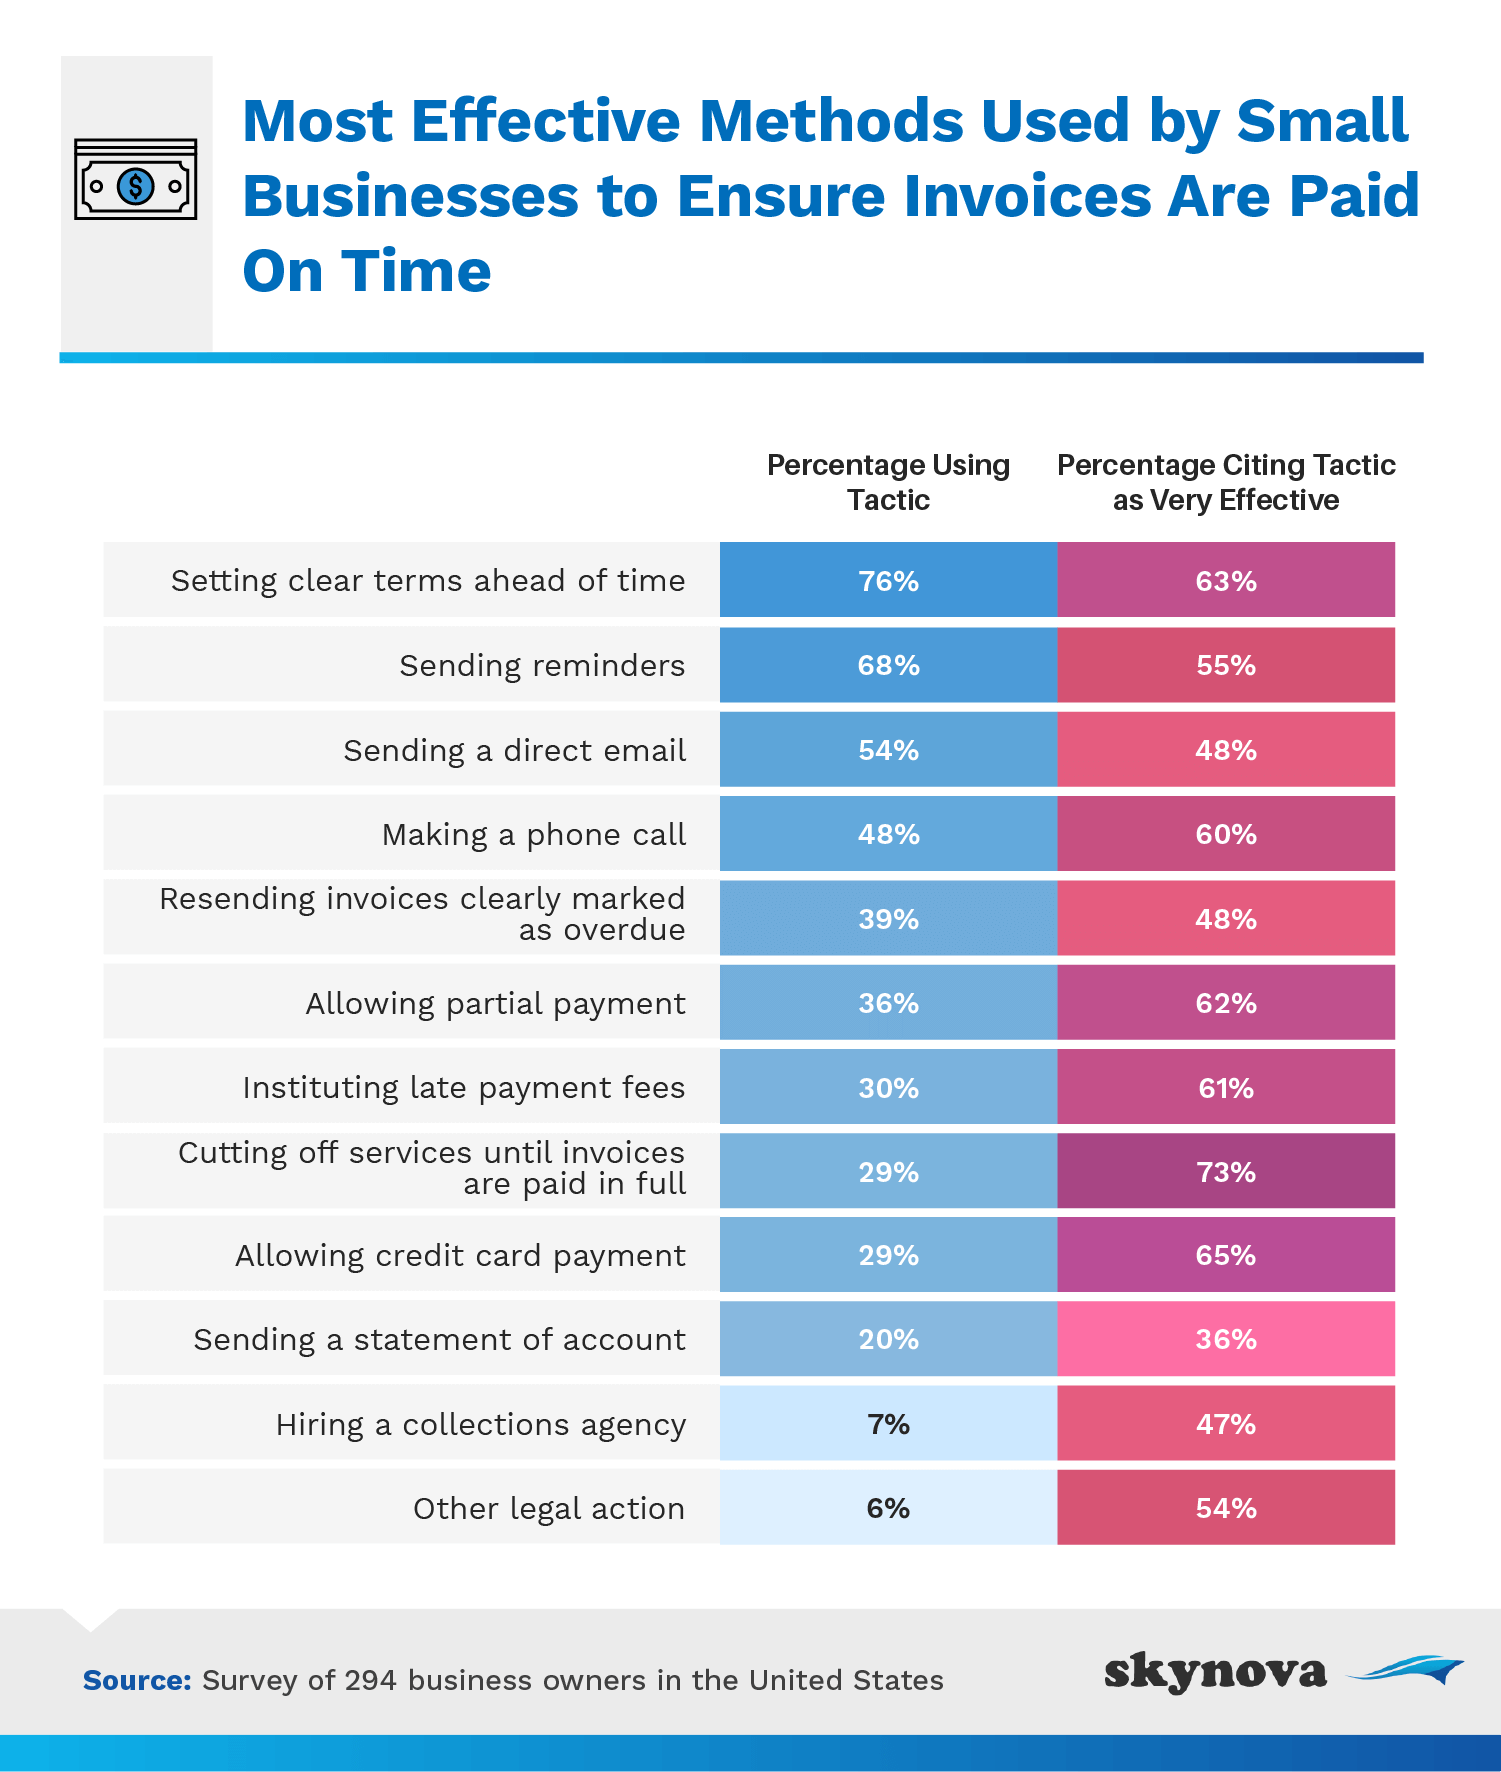 Most effective methods to ensure invoices are paid on time